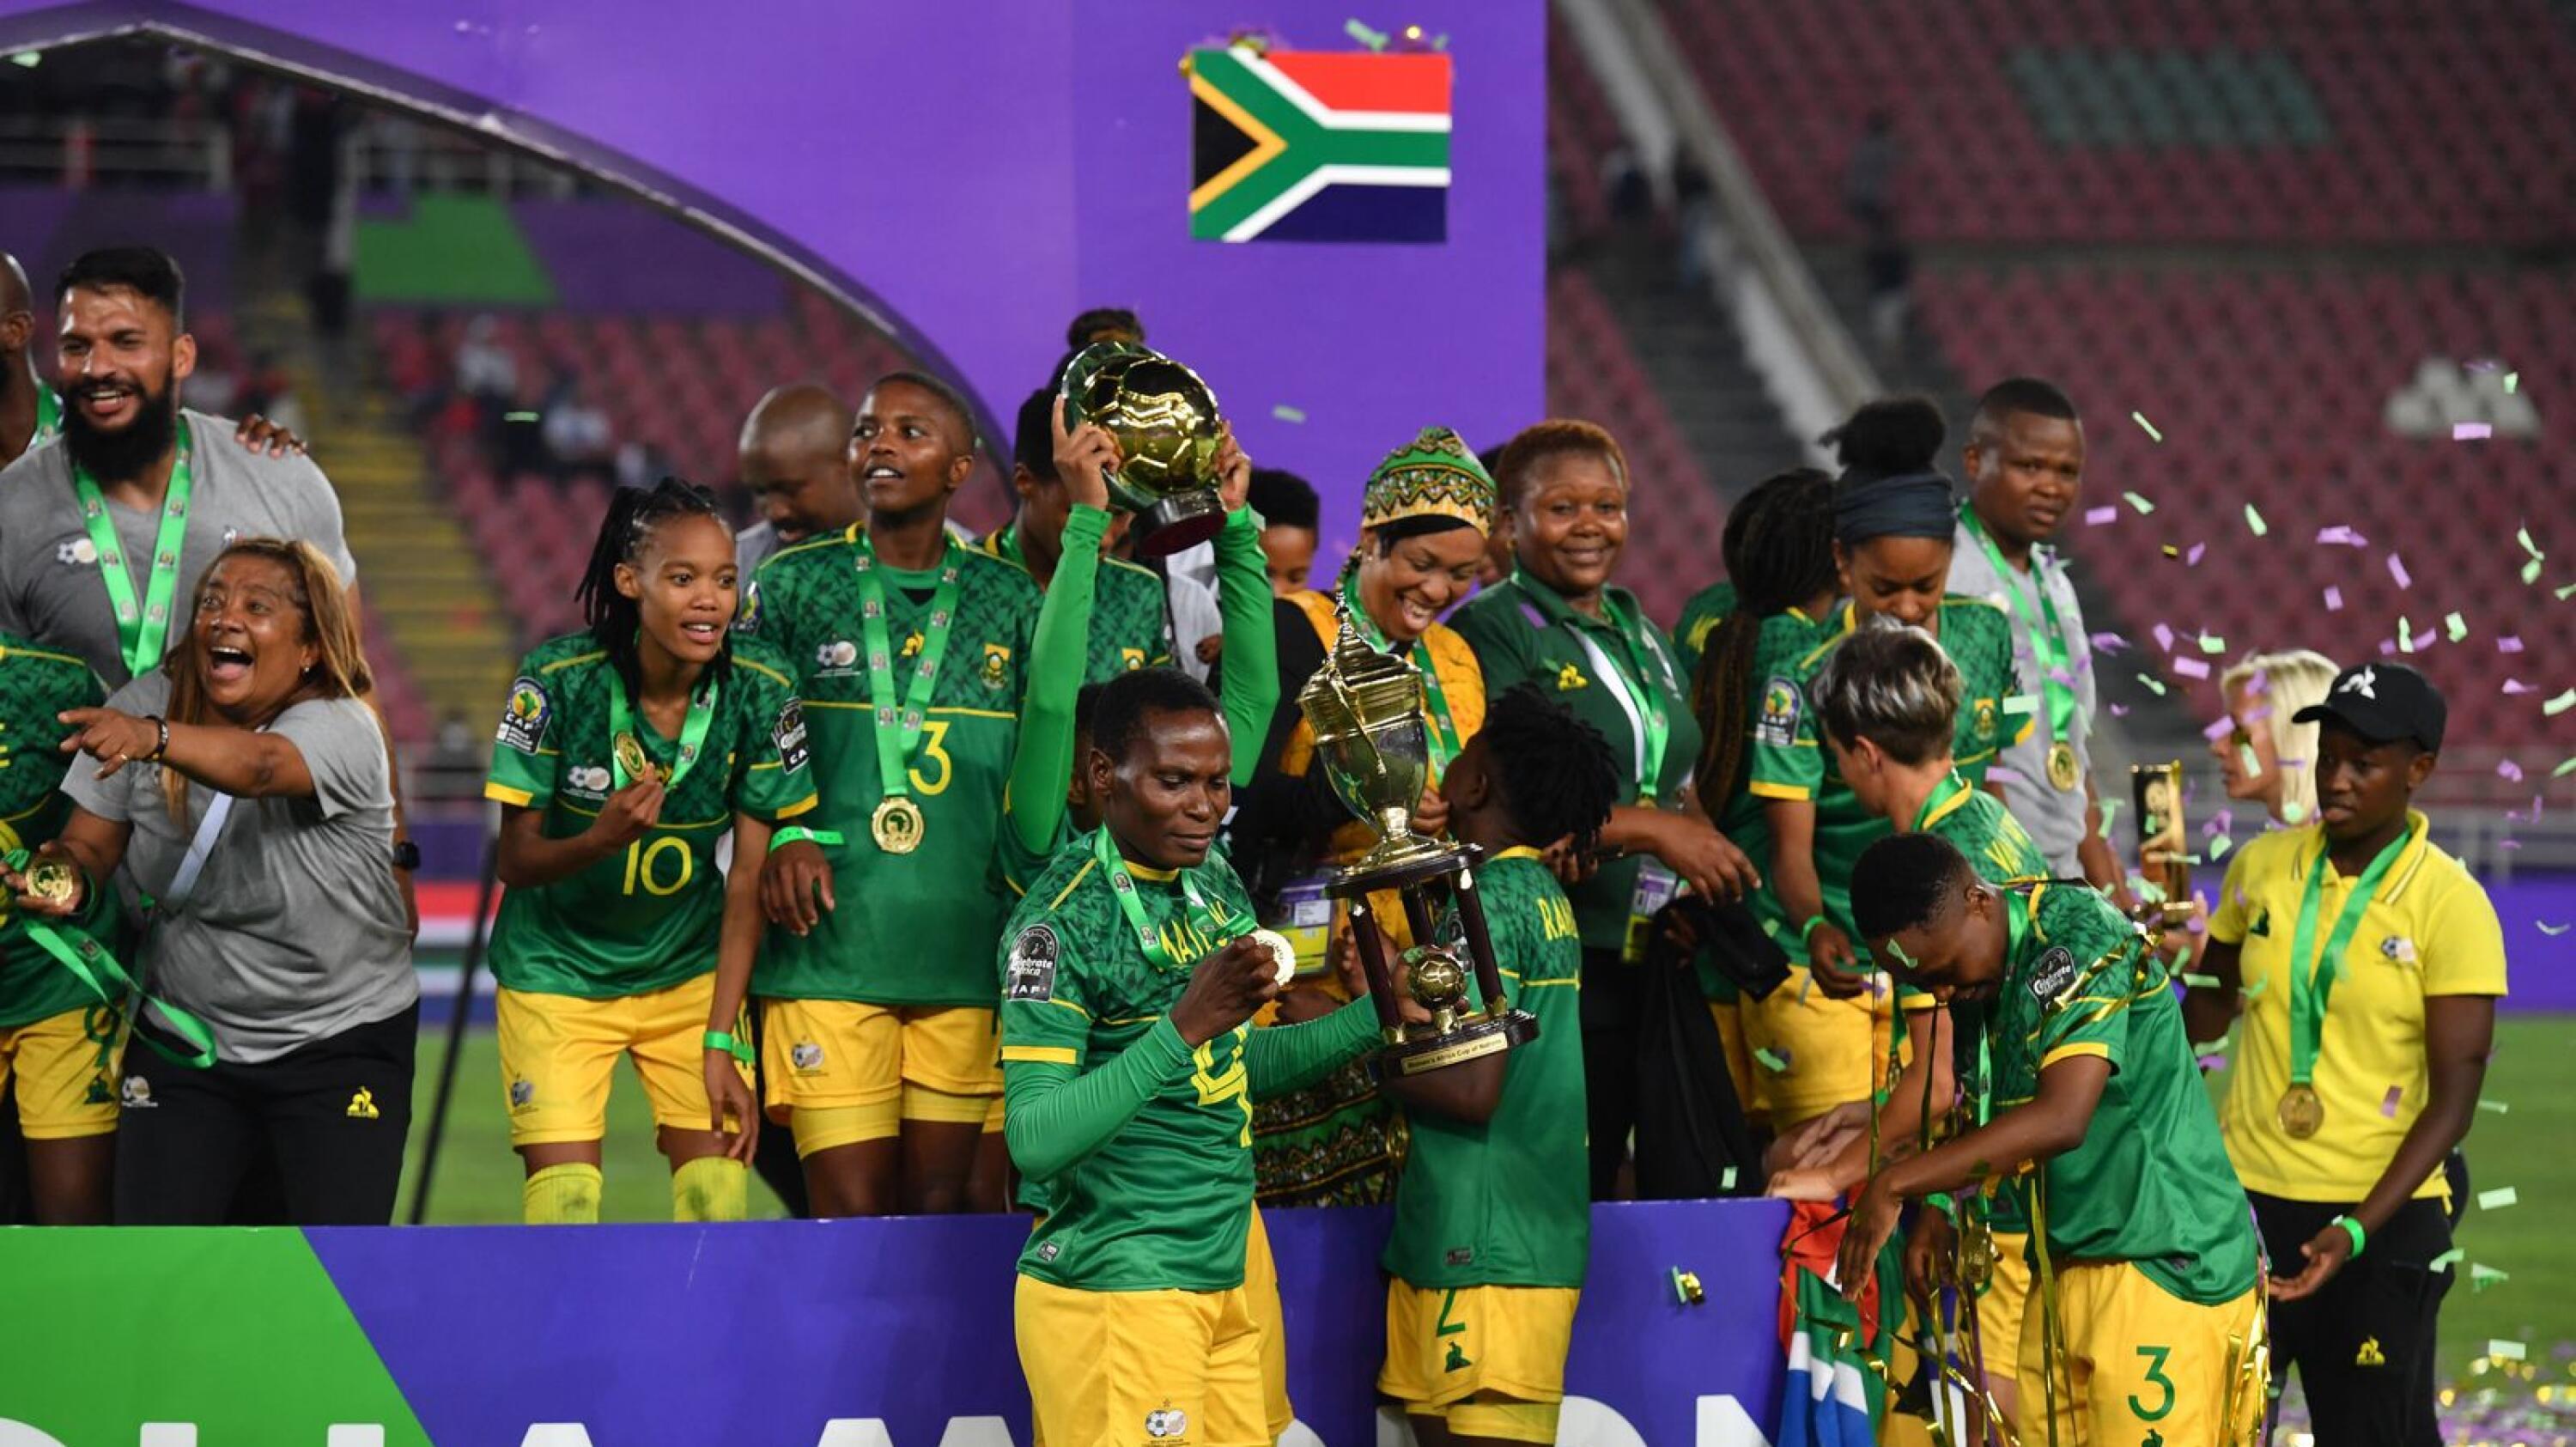 Banyana Banyana players celebrate with the trophy after beating Morocco in the fina of the Women's Africa Cup of Nations in Rabat last month